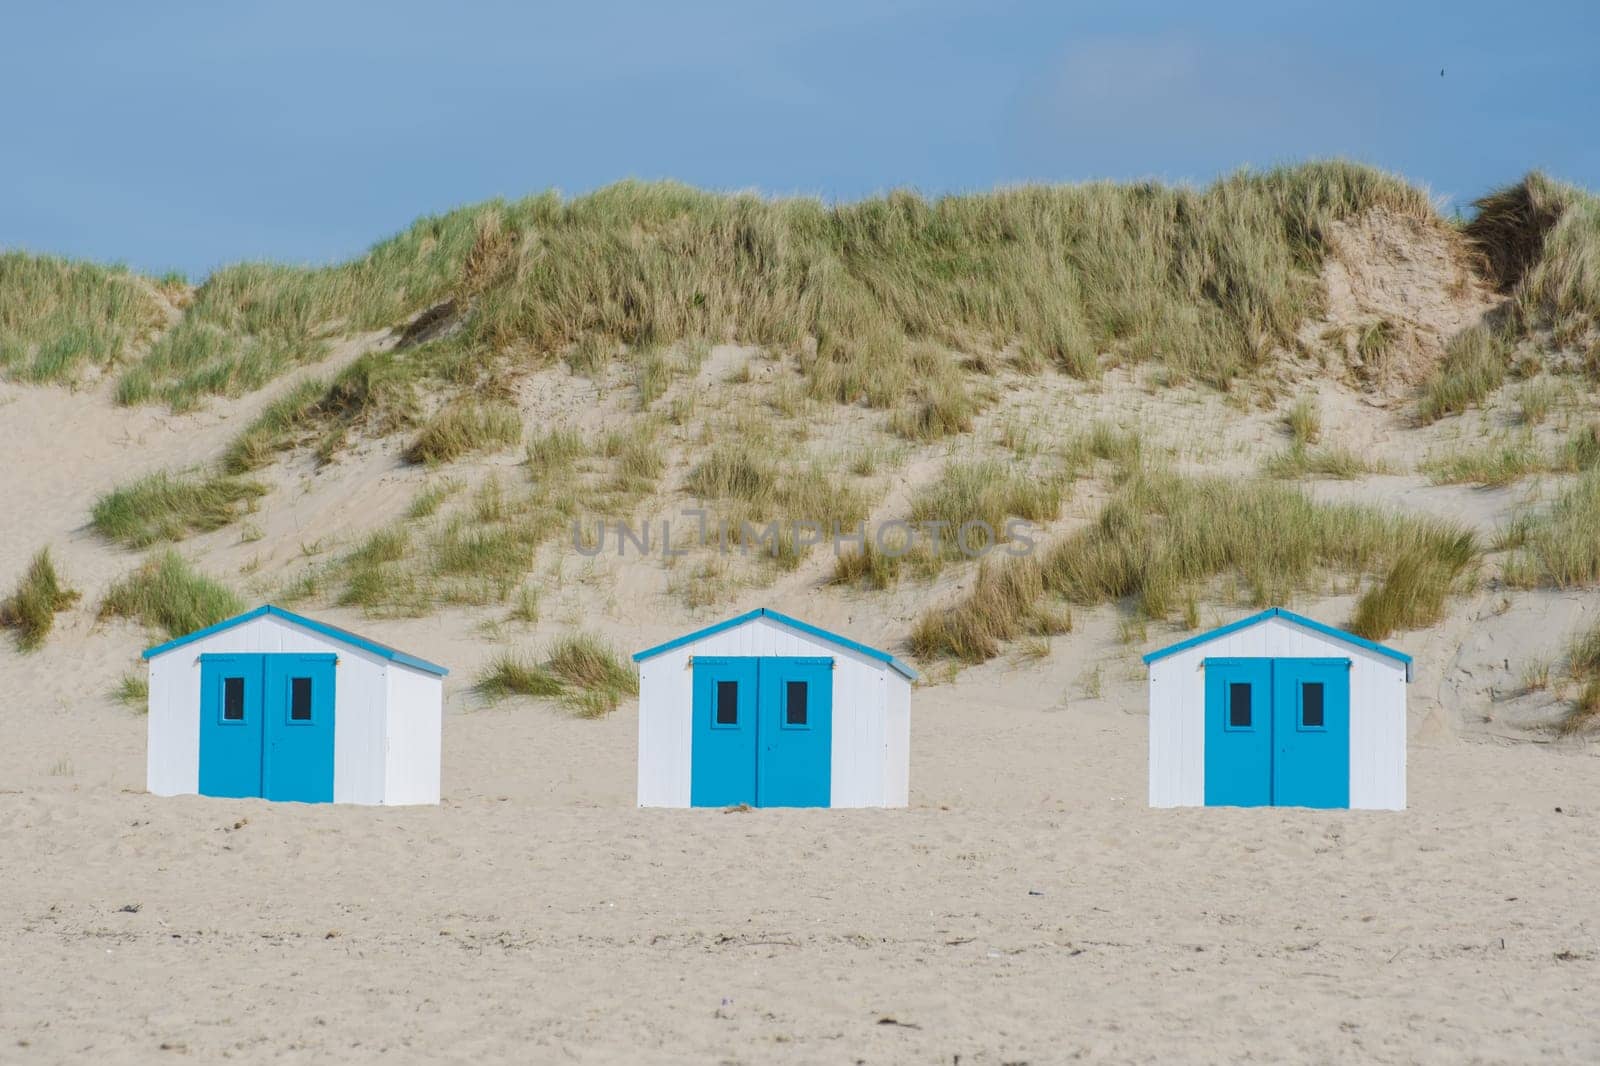 Beach huts painted in a rainbow of colors line the sandy shore on Texel, Netherlands, under a clear blue sky.